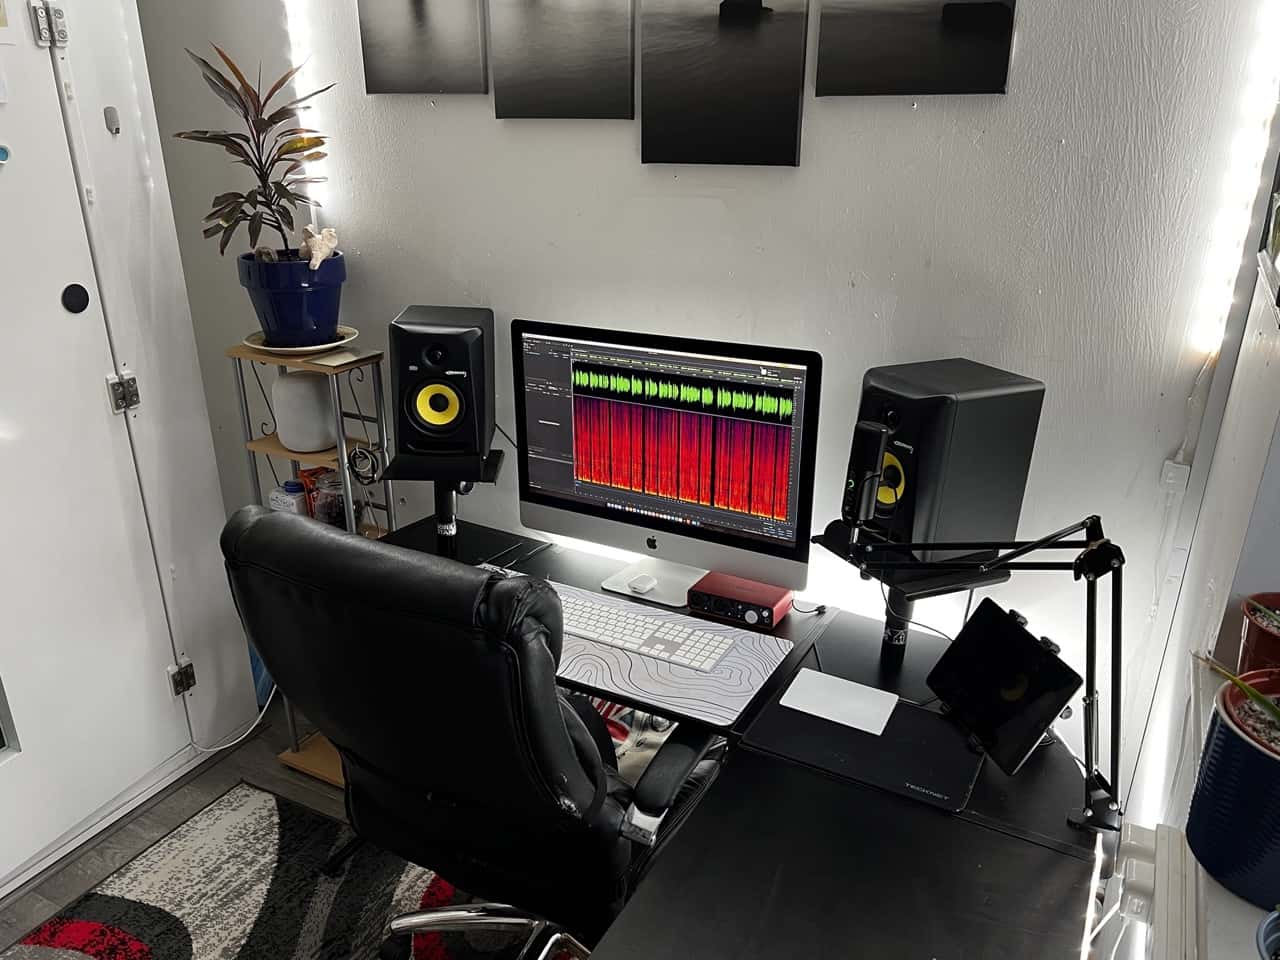 Close-up of the studio of Mark Thomas, a British VoiceOver artist in colour. There are two speakers and an iMac showing an audio way Close-up of the studio of Mark Thomas, a British VoiceOver artist in colour. There are two speakers and an iMac showing an audio waveform